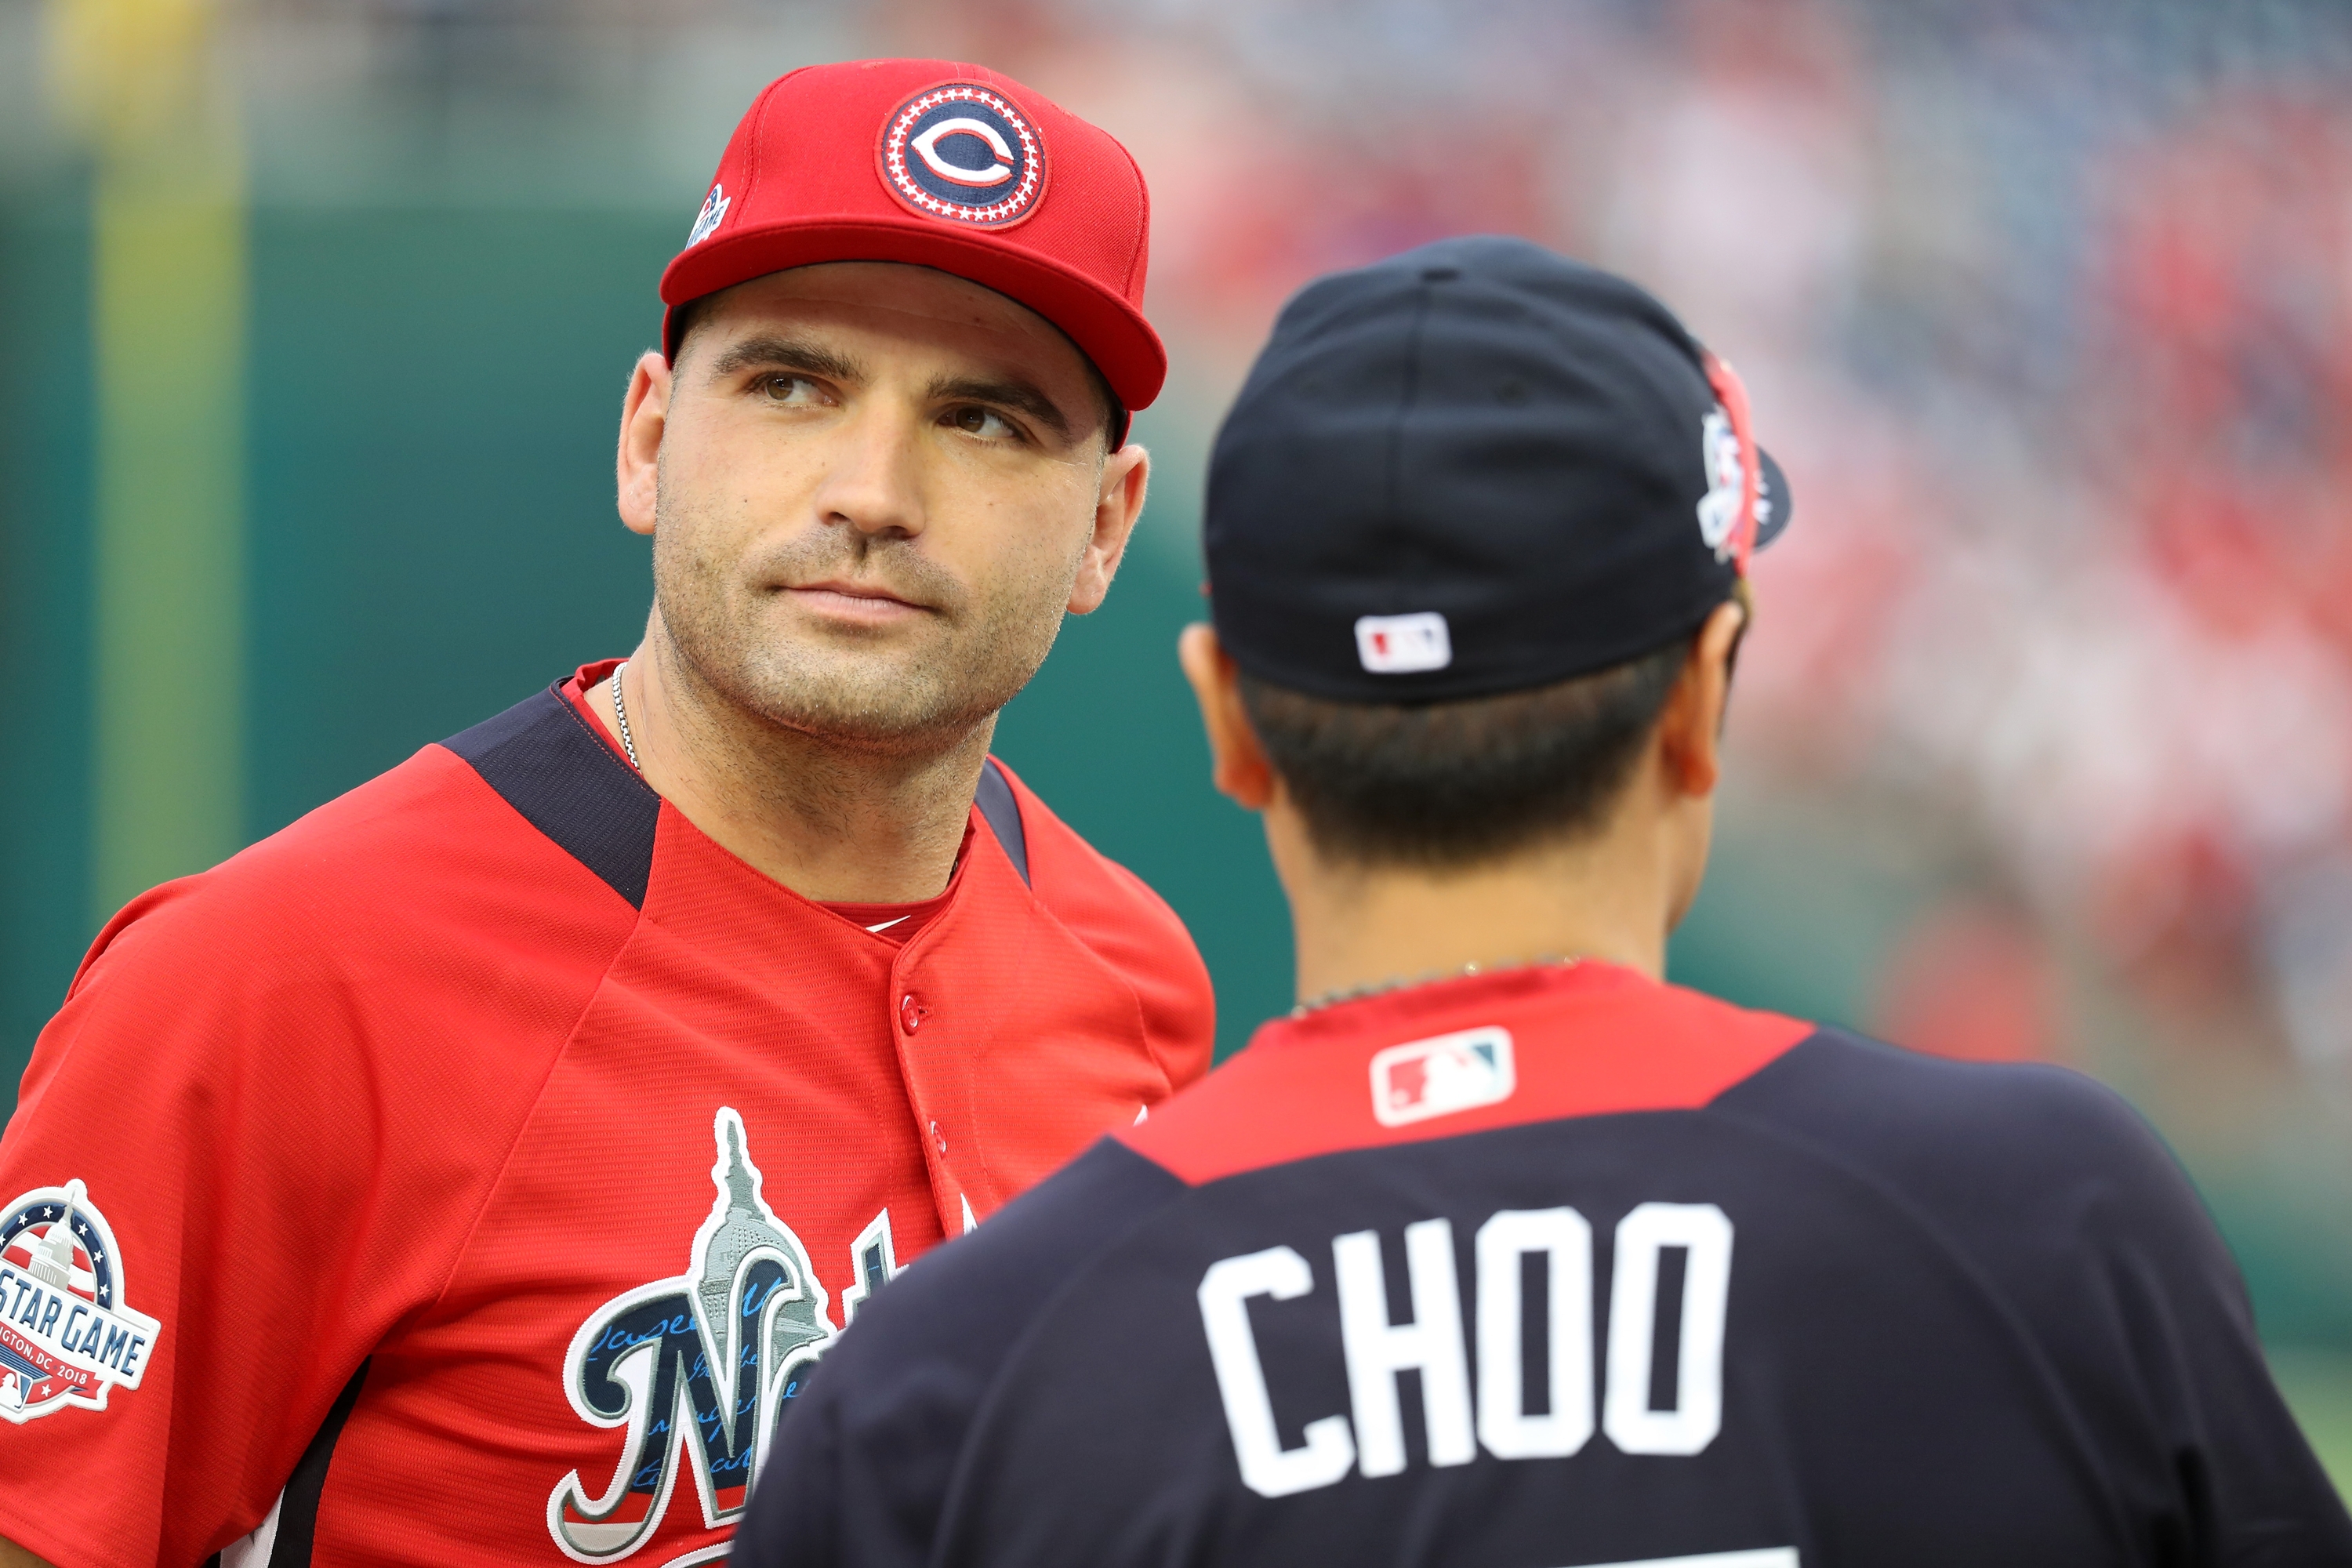 Votto named Canada's top baseball player for 3rd year in a row